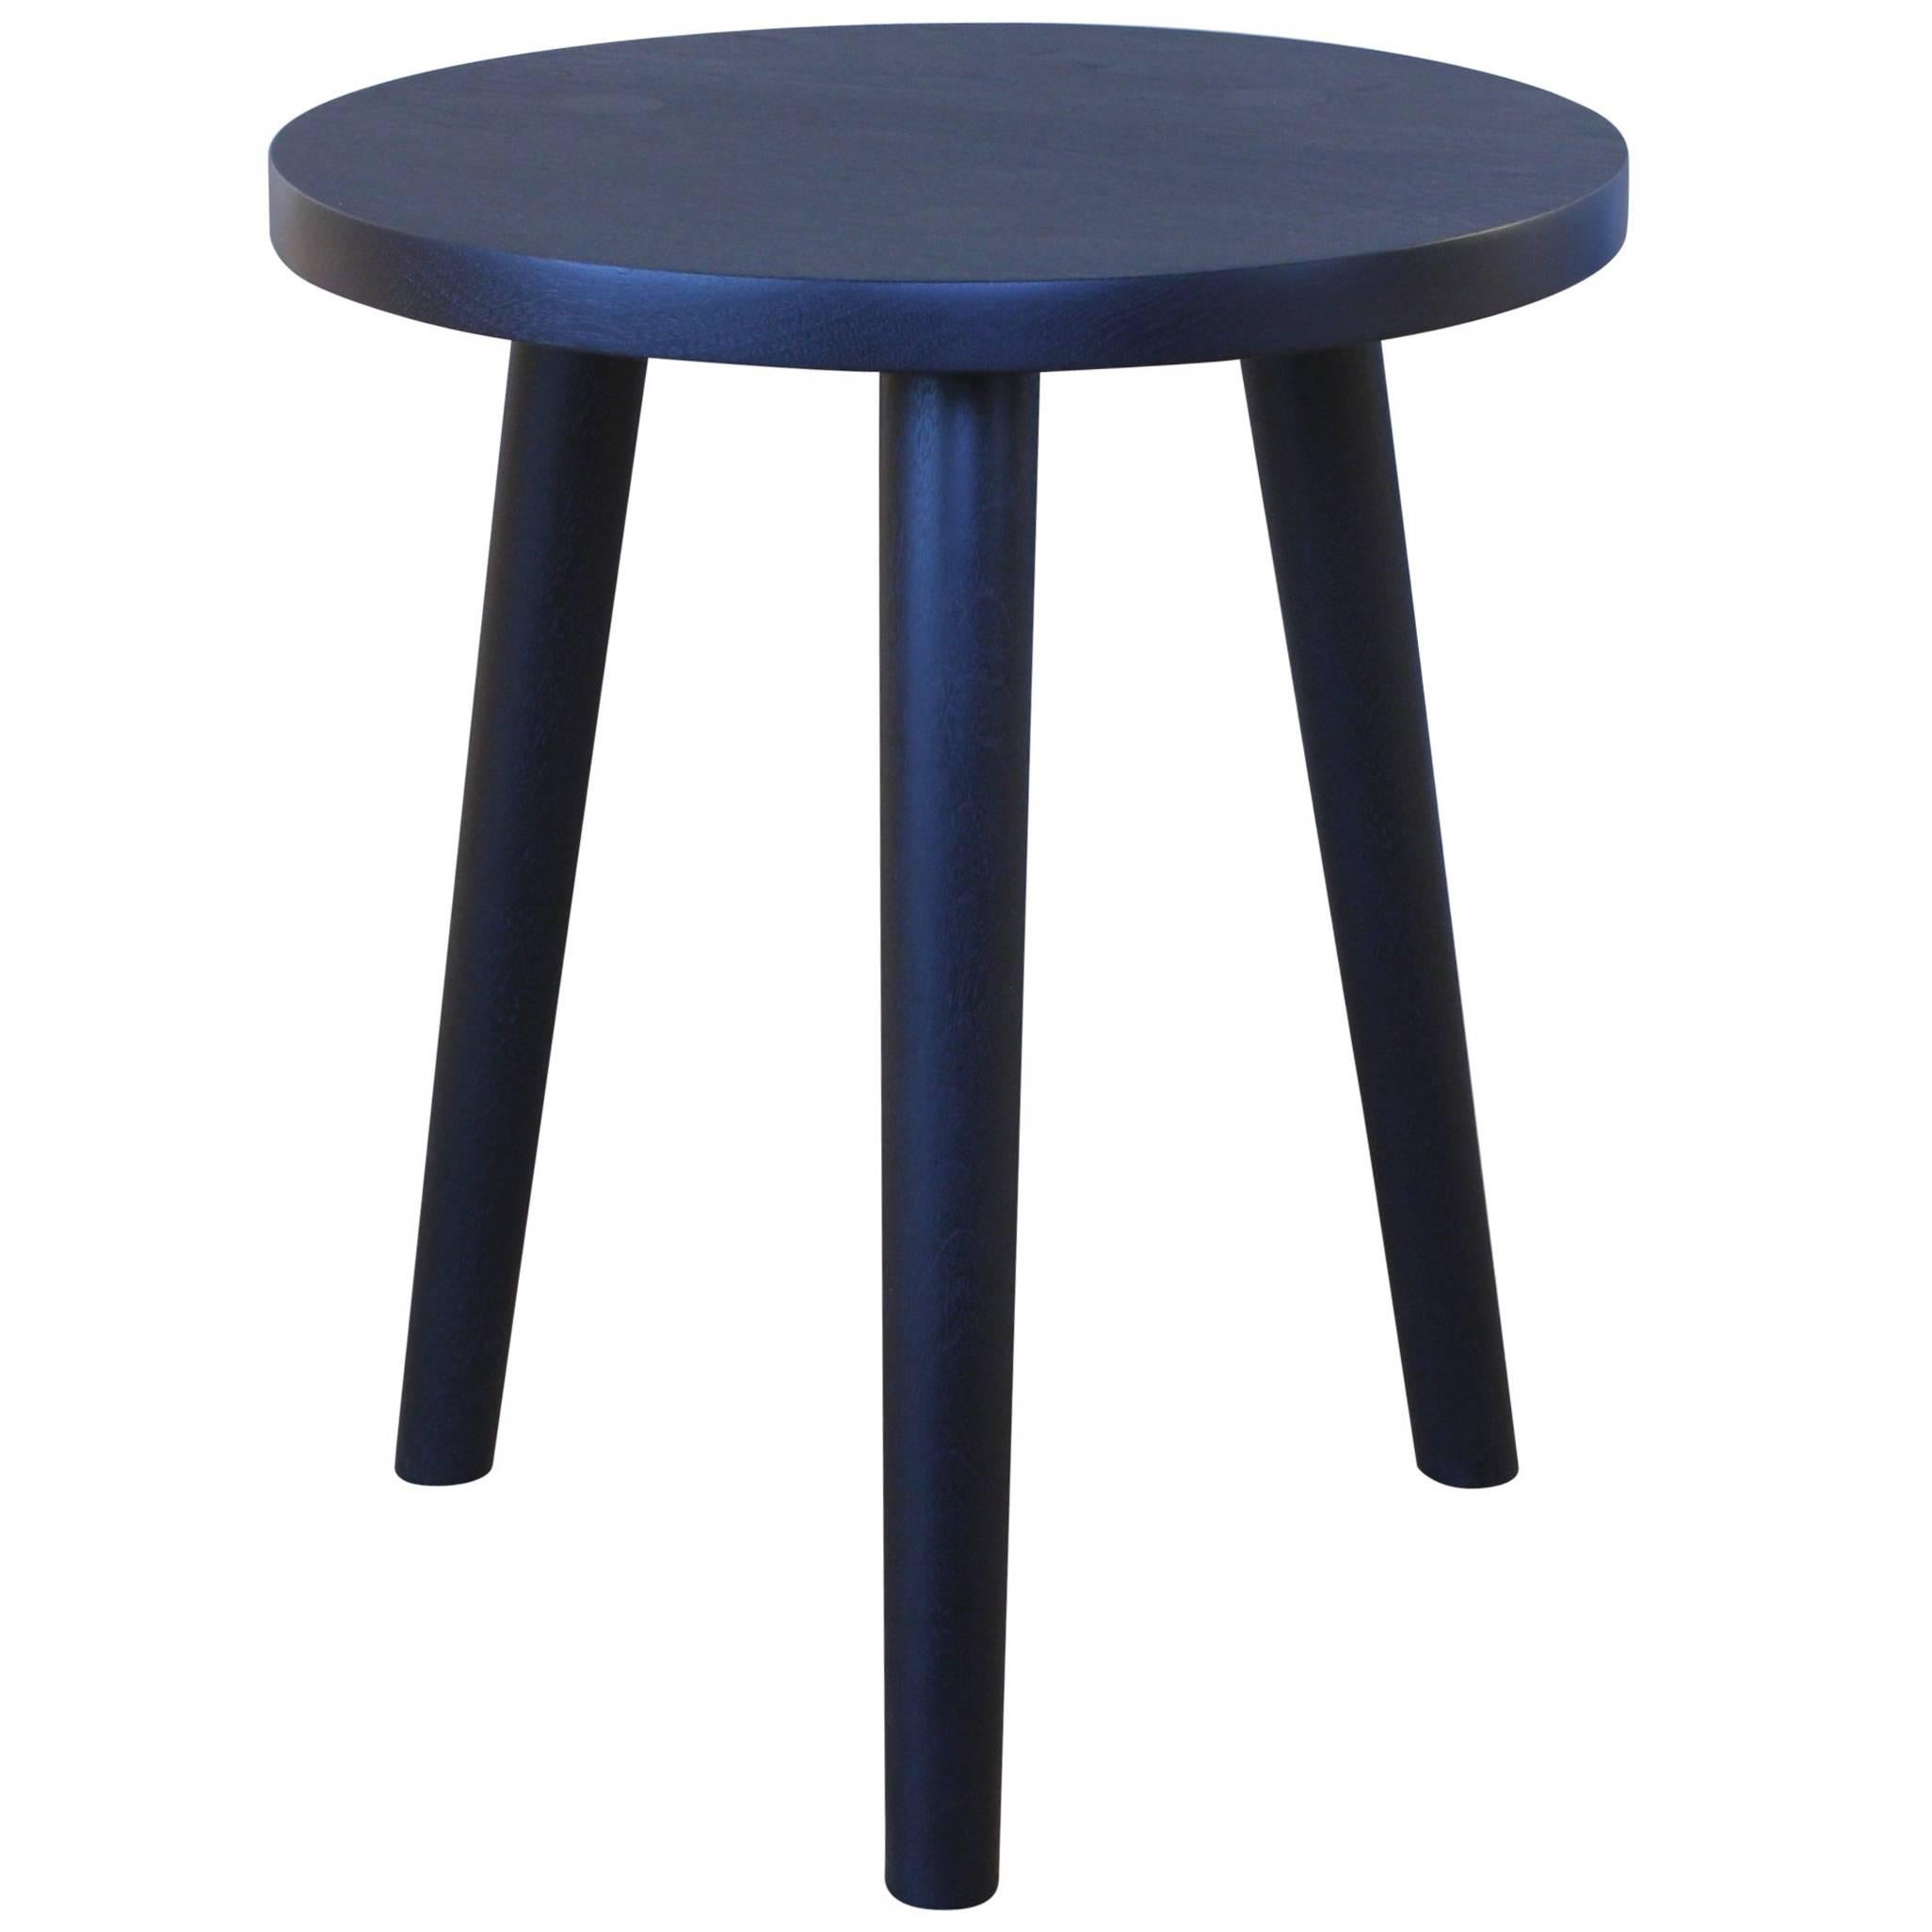 Ebonized Walnut, A Solid Wood Stool or Side Table with Turned Legs For Sale